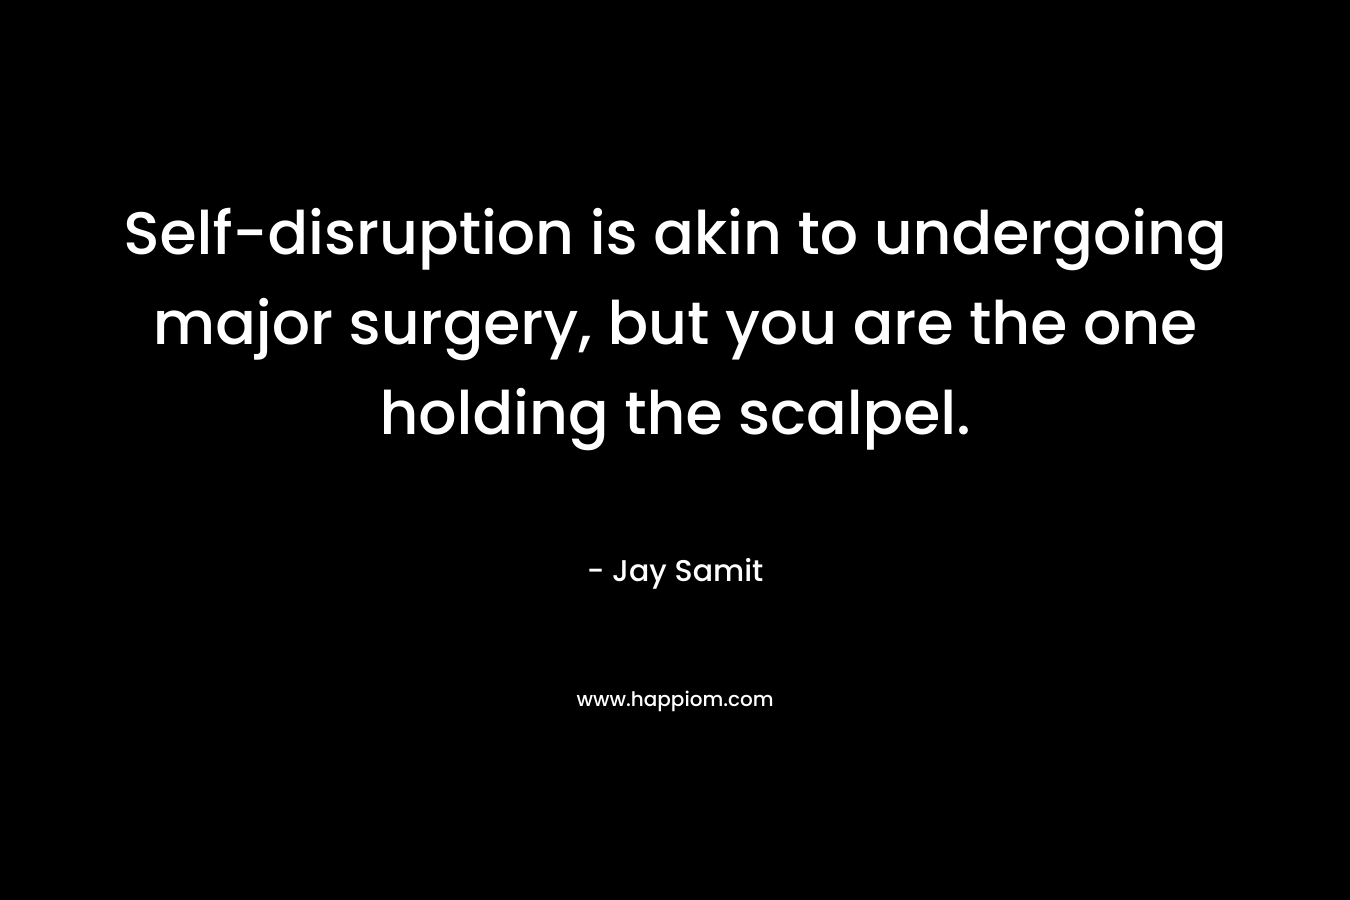 Self-disruption is akin to undergoing major surgery, but you are the one holding the scalpel. – Jay Samit